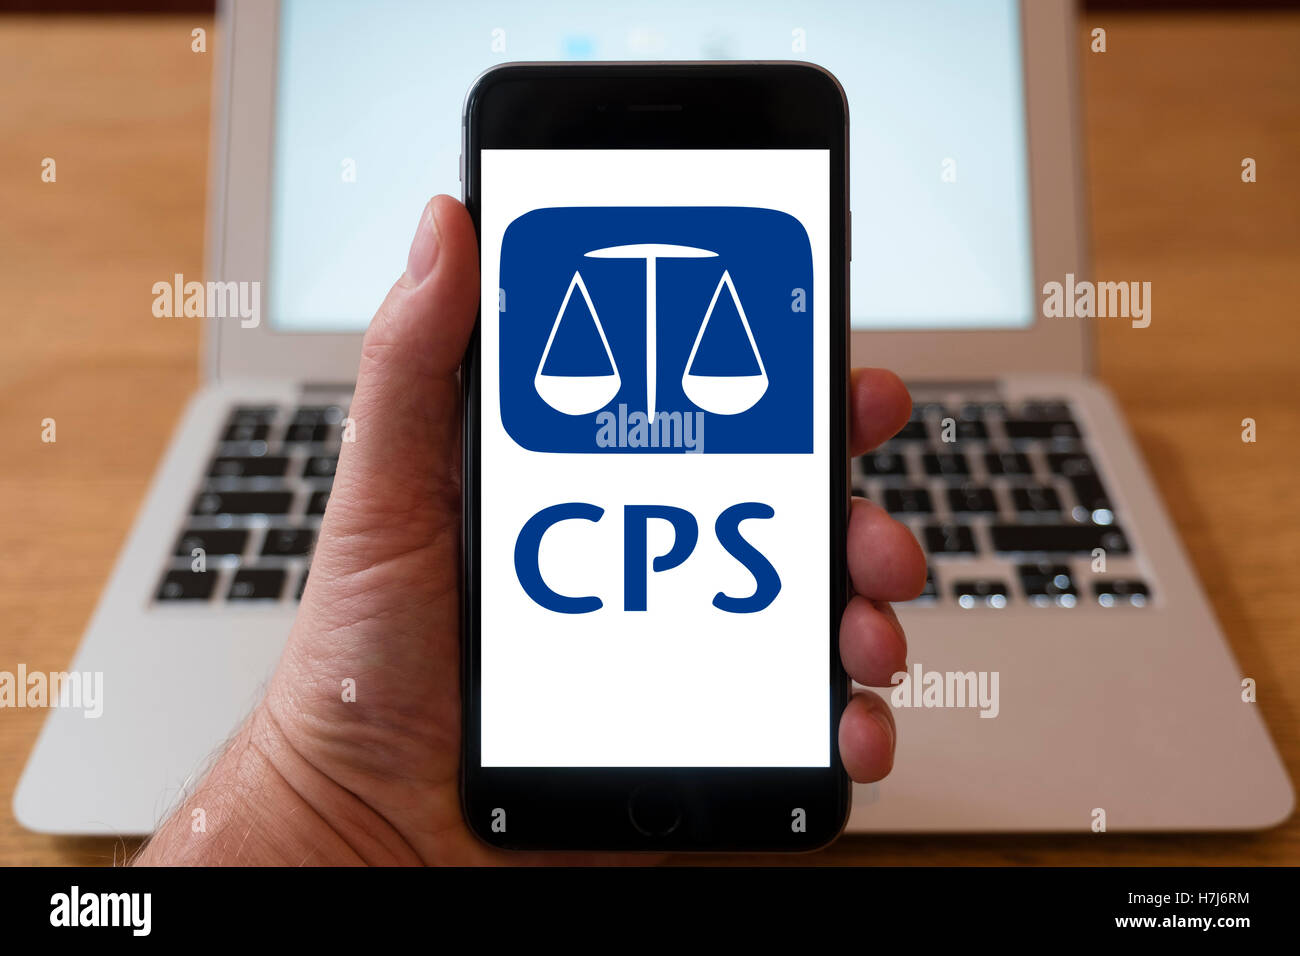 Using iPhone smart phone to display logo of Crown Prosecution Service, in the UK Stock Photo